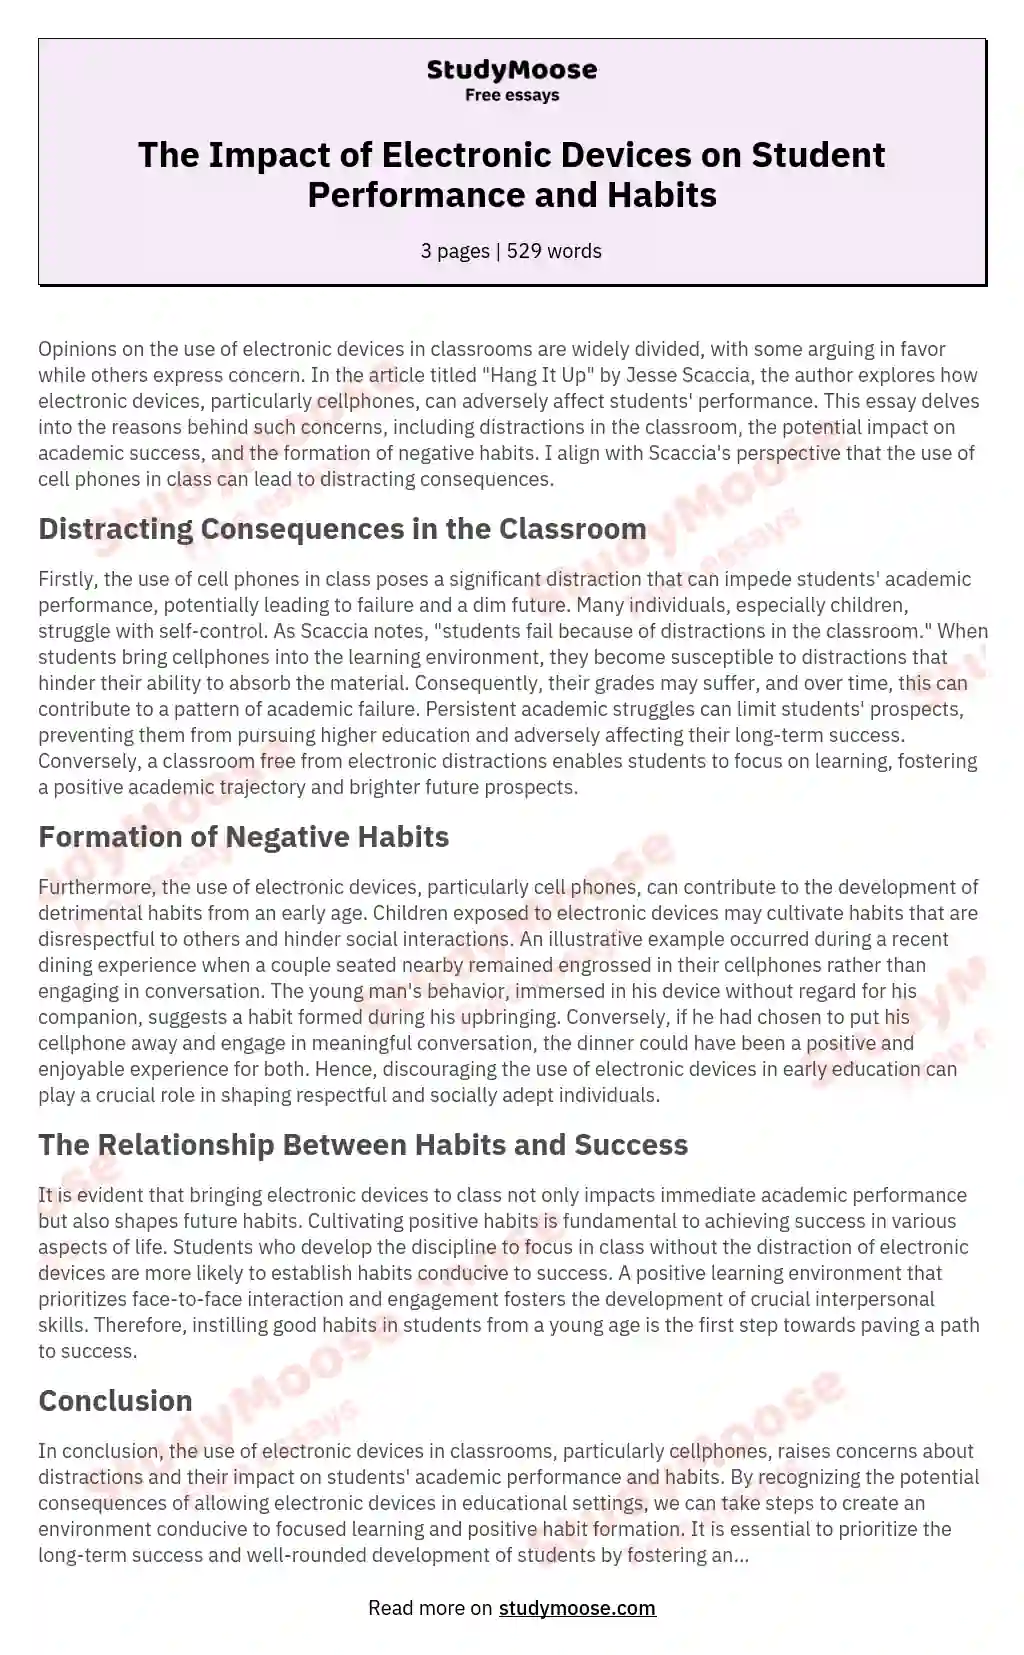 The Impact of Electronic Devices on Student Performance and Habits essay